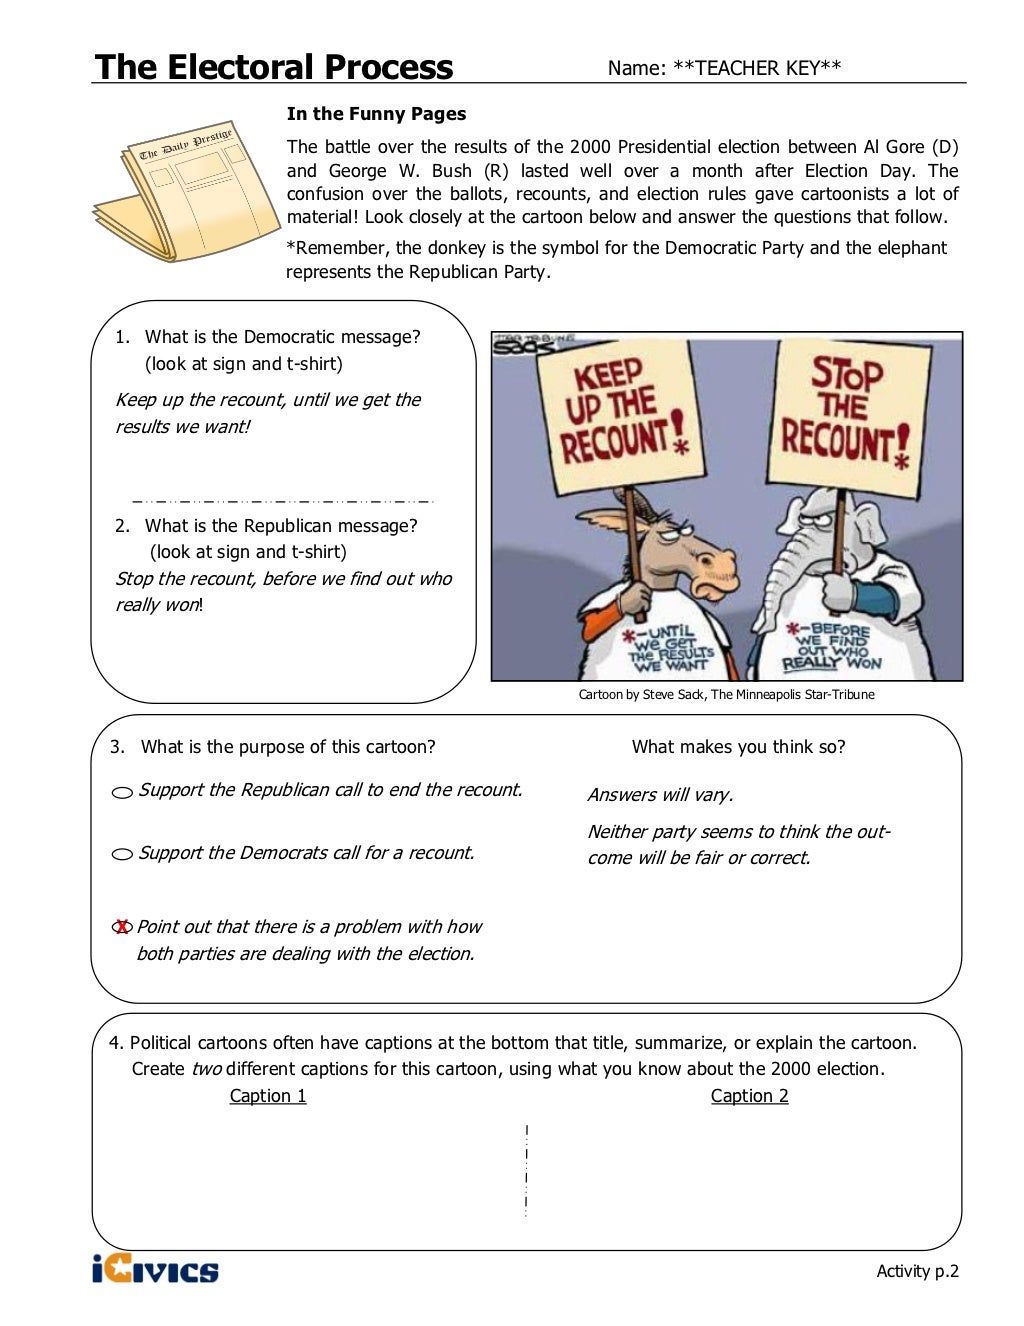 The Electoral Process Worksheet Answers